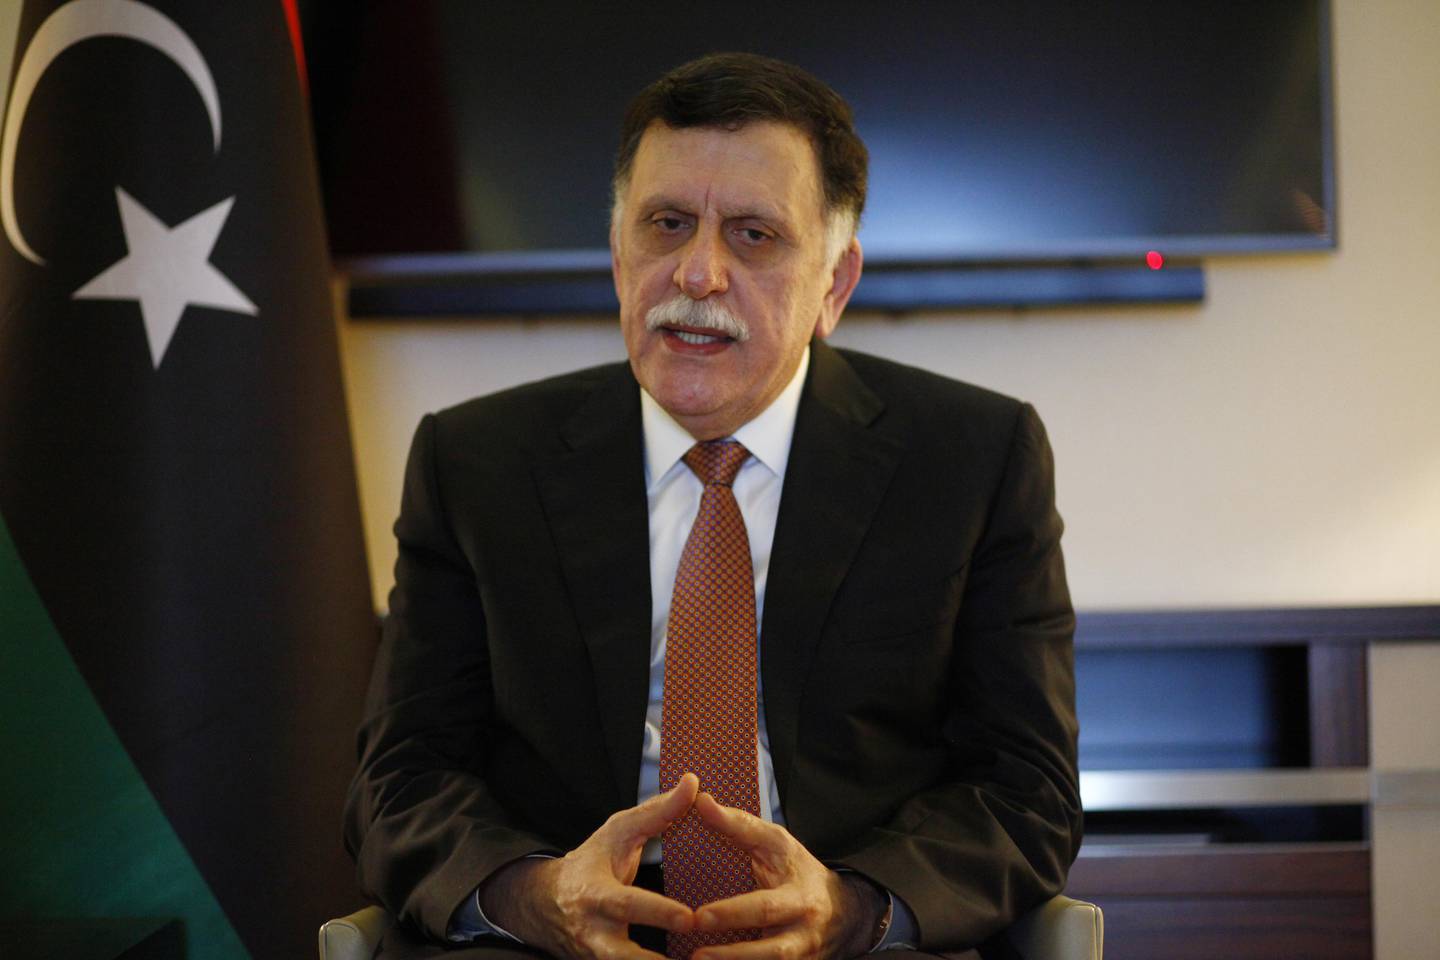 Fayez Mustafa al-Sarraj, Libya's internationally recognised Prime Minister, is pictured during an interview, in Berlin, Germany January 20, 2020.    REUTERS/Michele Tantussi